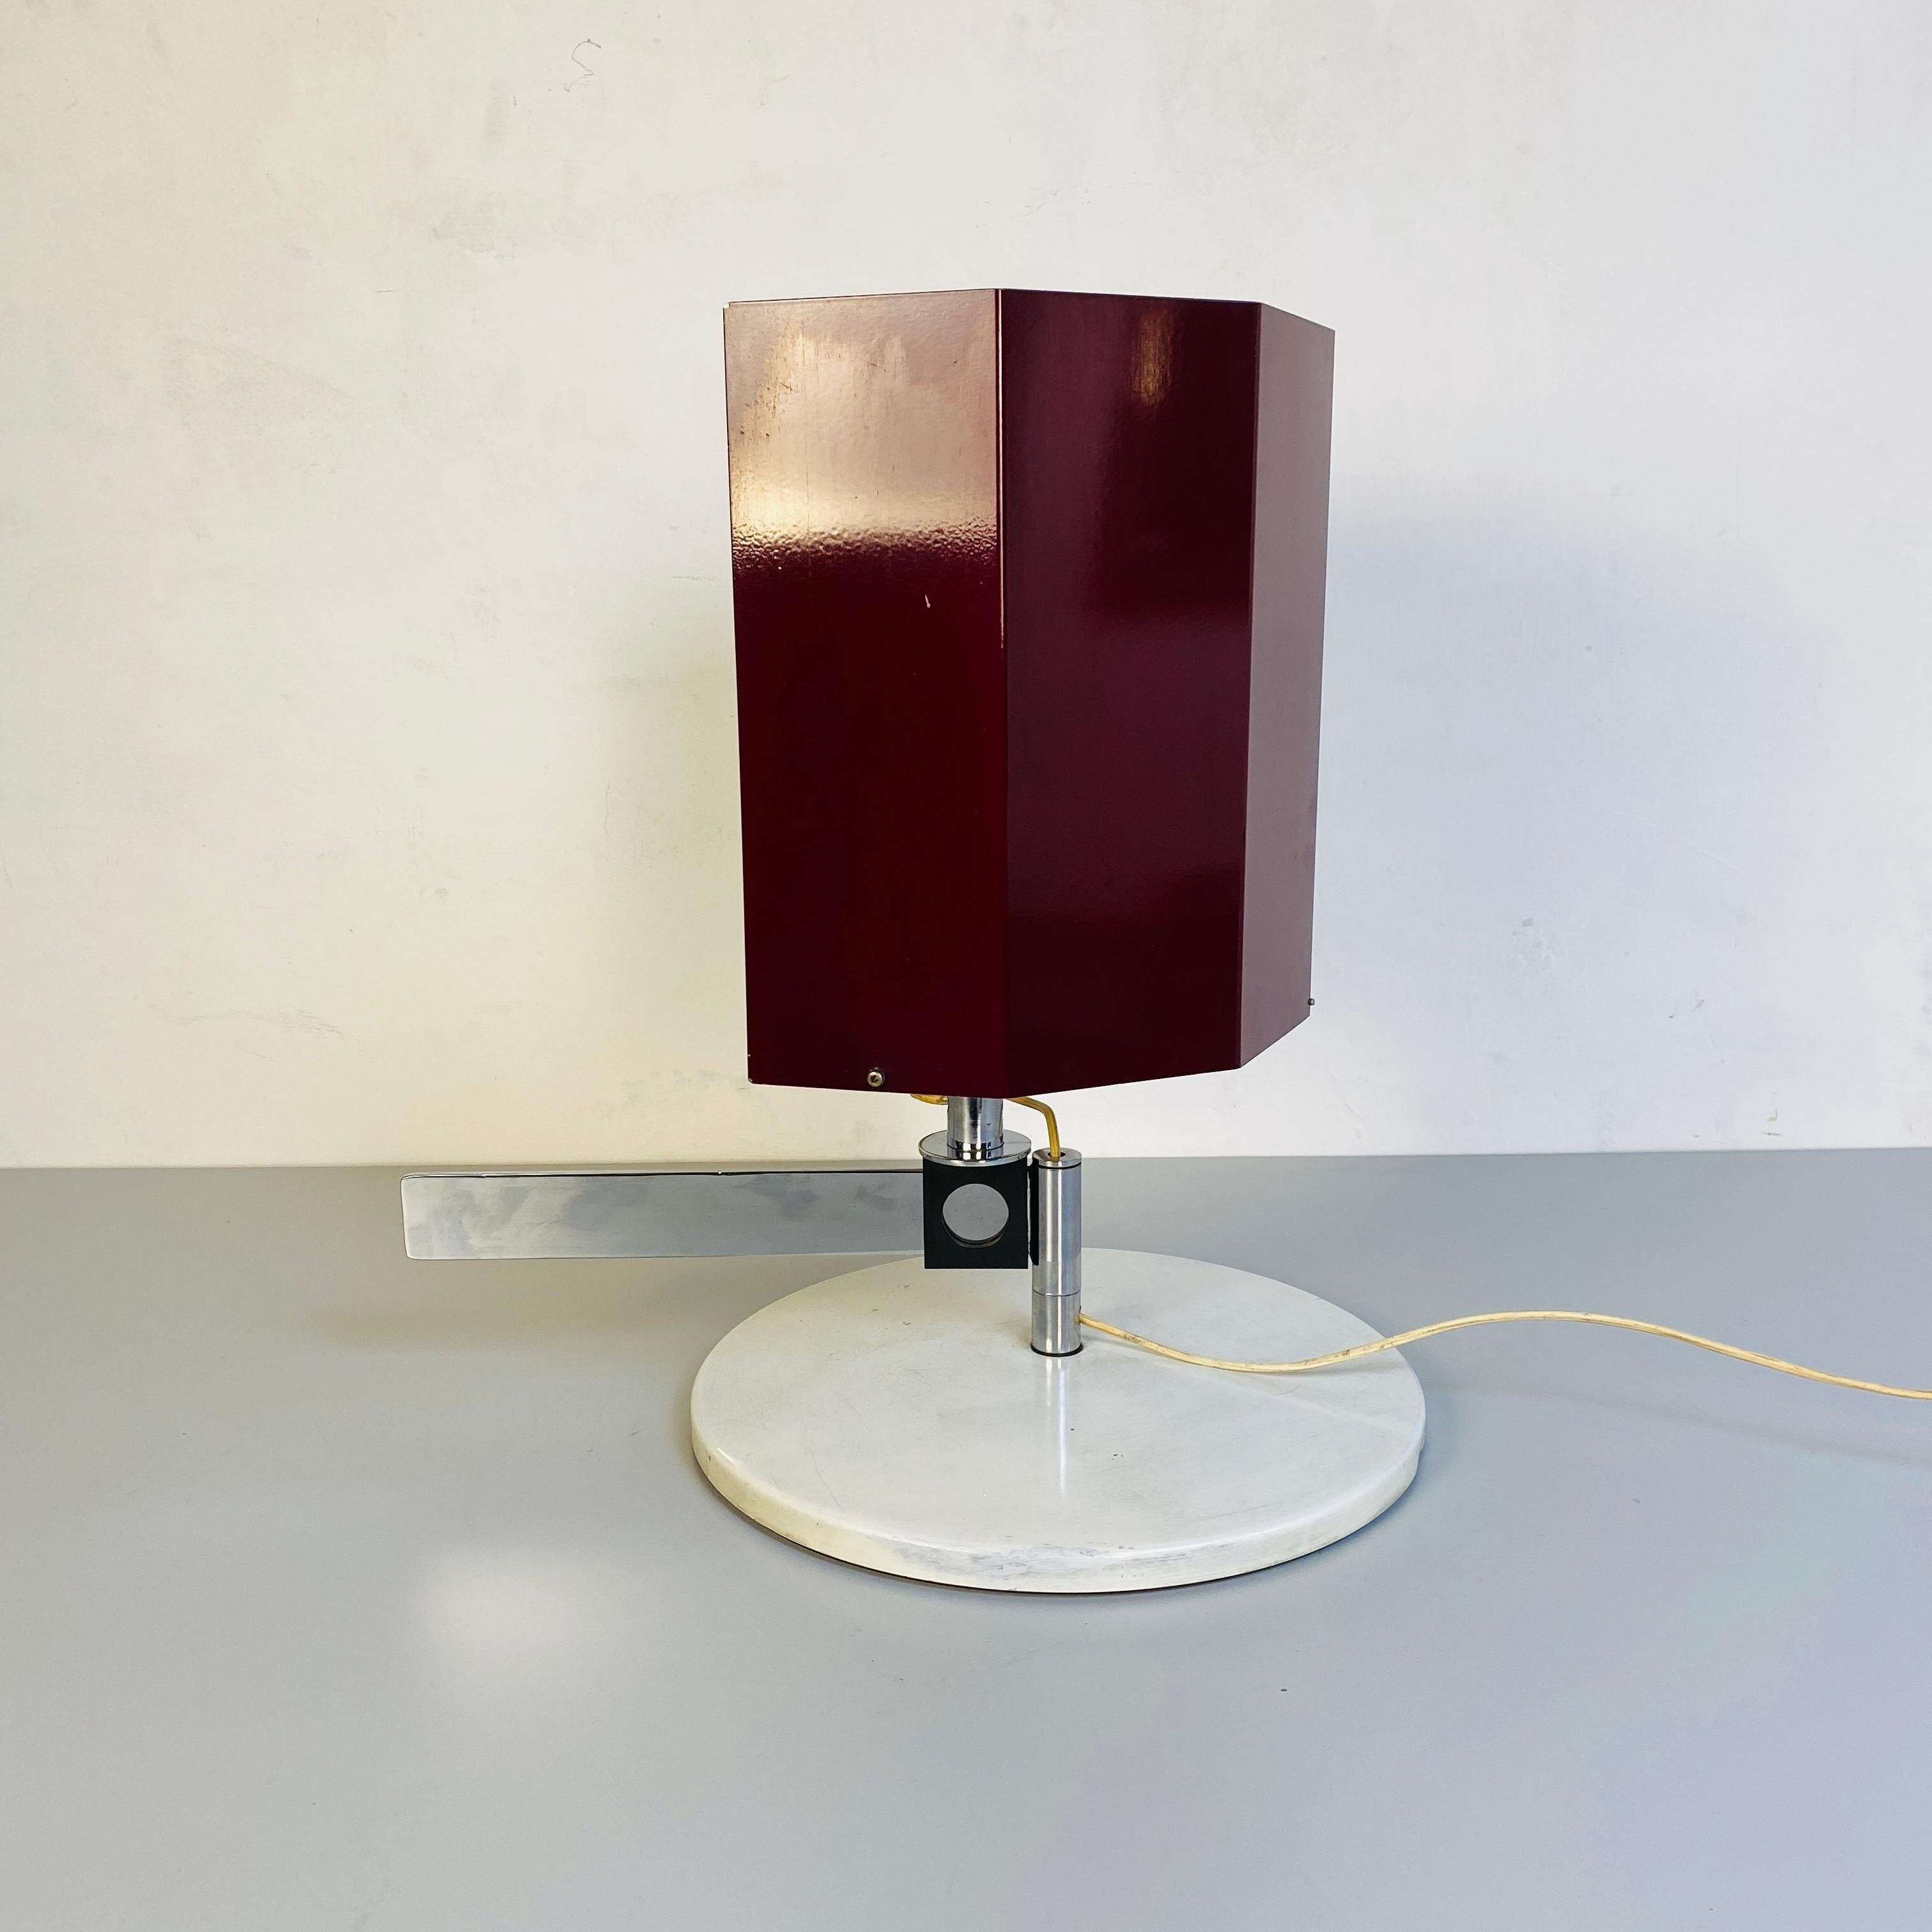 Italian mid-century modern bauhaus table Lamp by Carl Jacob Jucker for Imago DP Italy, 1960s
Bauhaus table lamp with structure in aluminum and chromed metal, base in white painted metal and lampshade in purple painted metal.
The lamp was designed